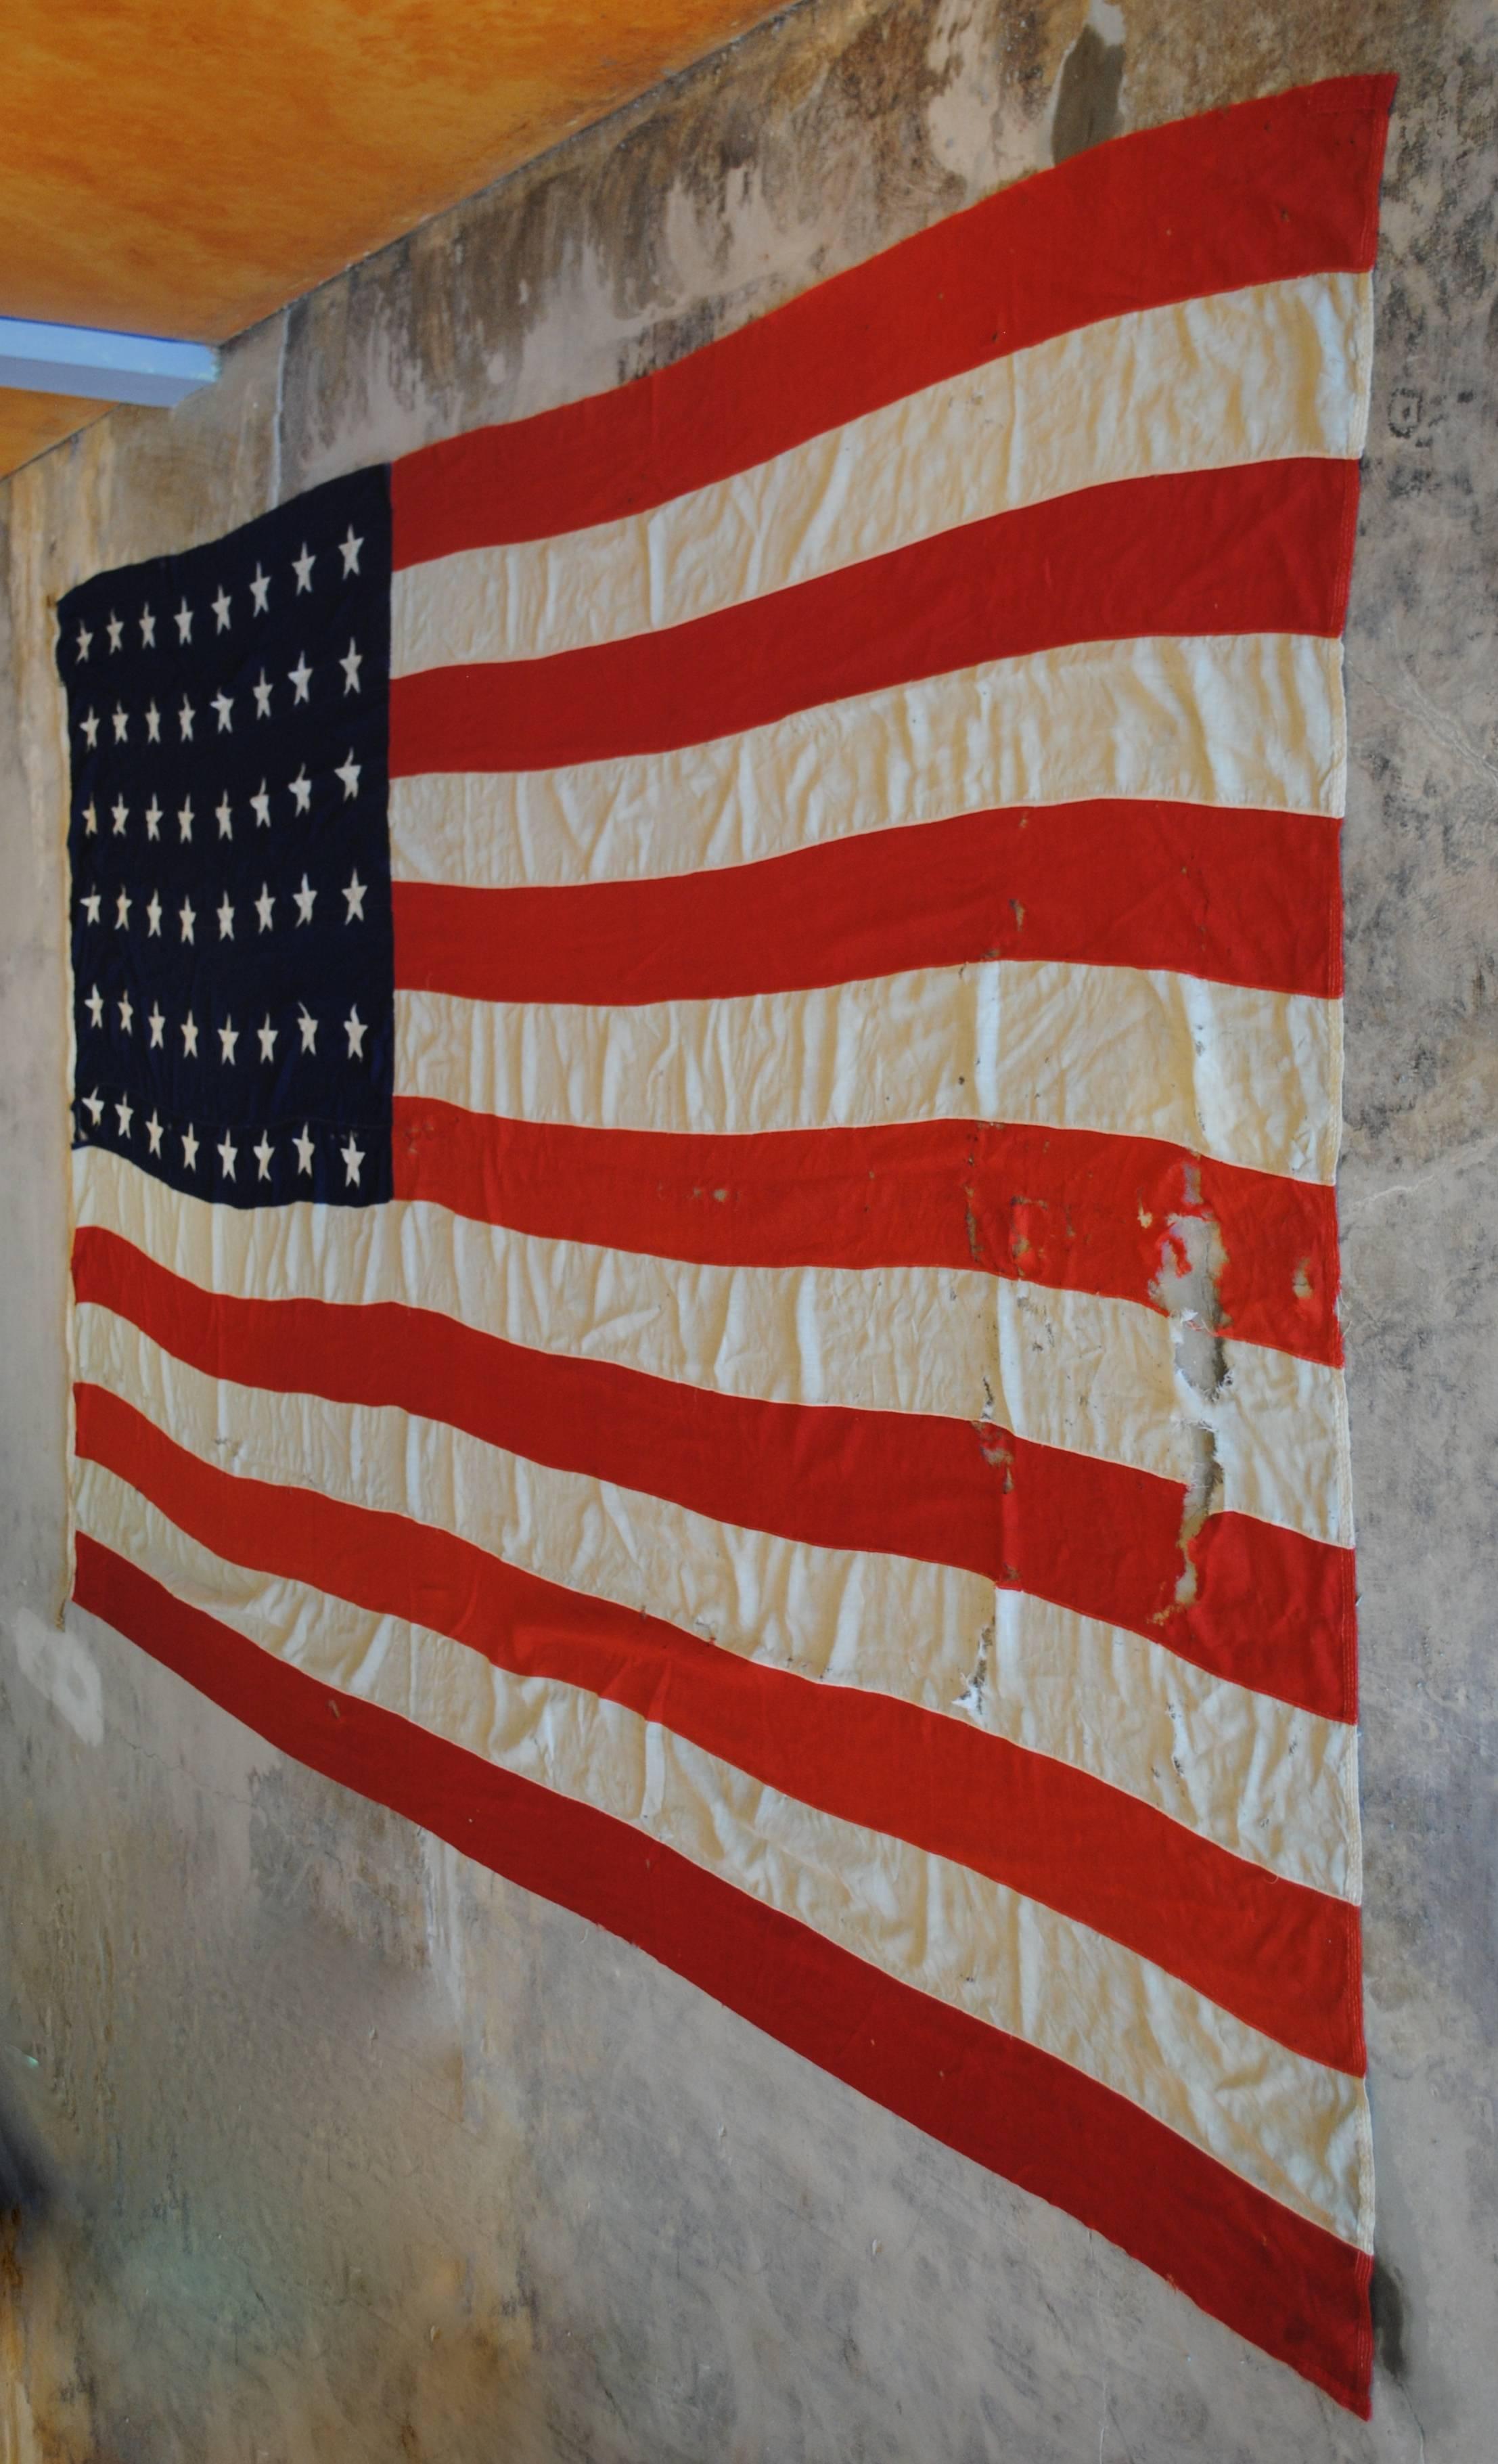 Enormous early American flag. 48 sewn stars. Color still vibrant.